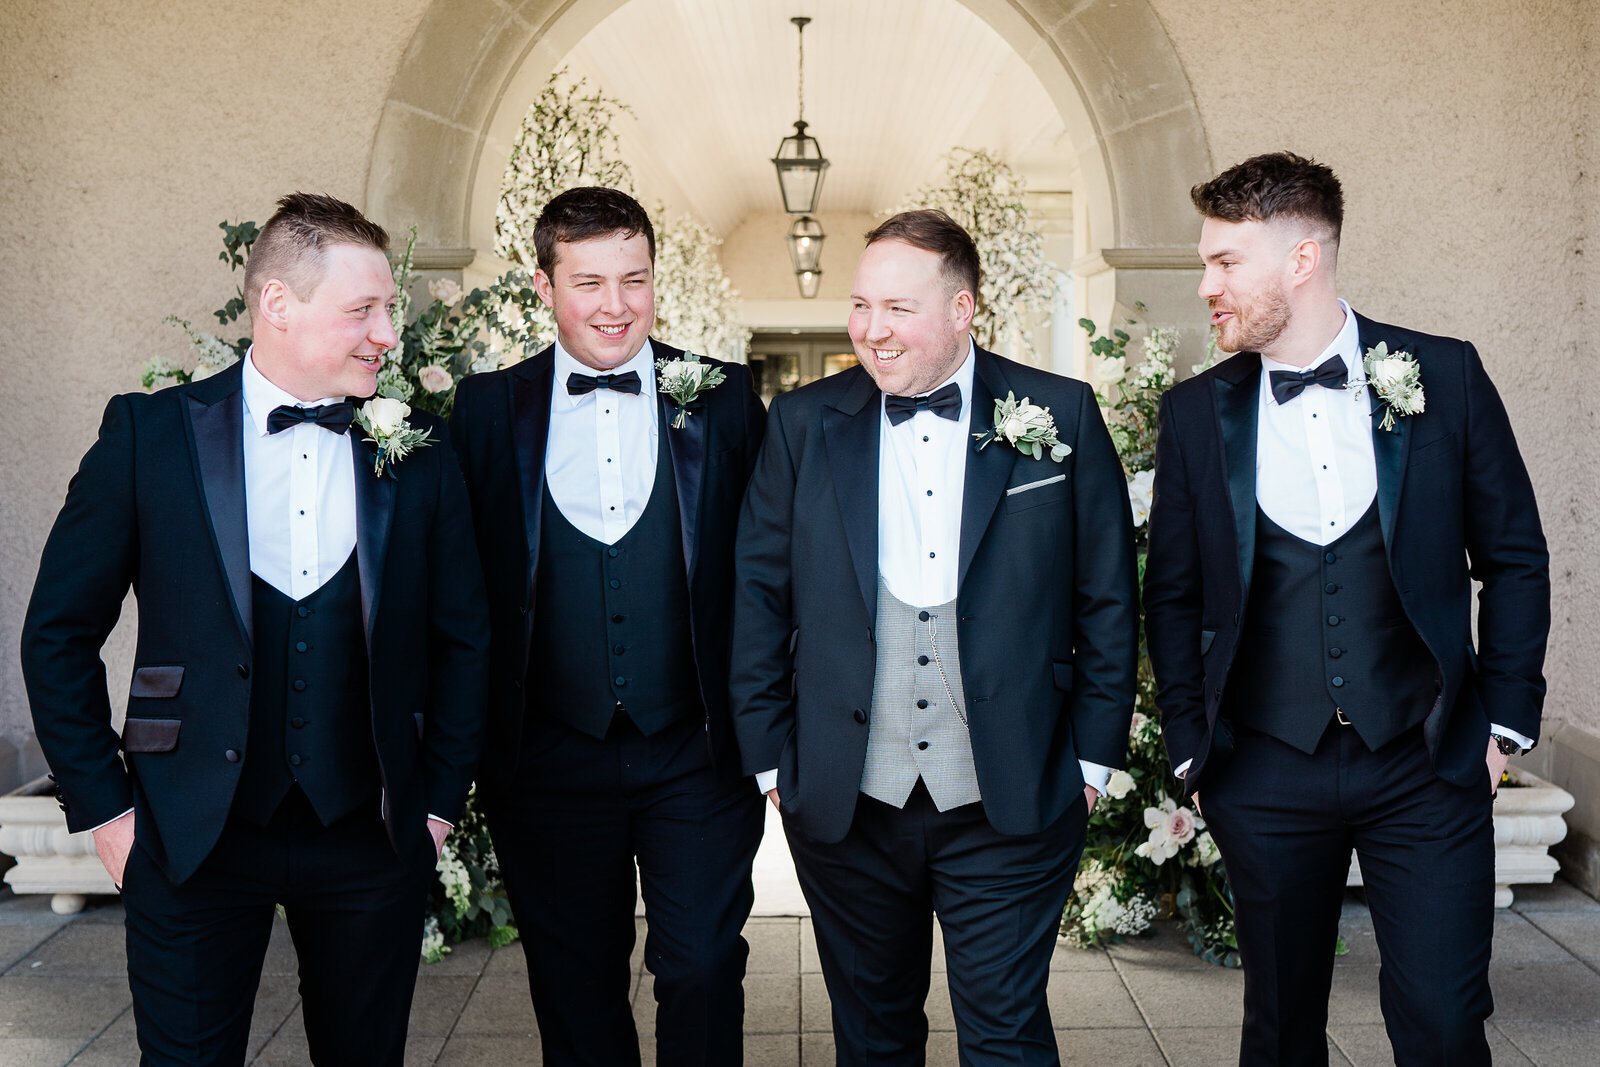 Timeless Relaxed Wedding Photography Lough Erne Resort Fermanagh (23)